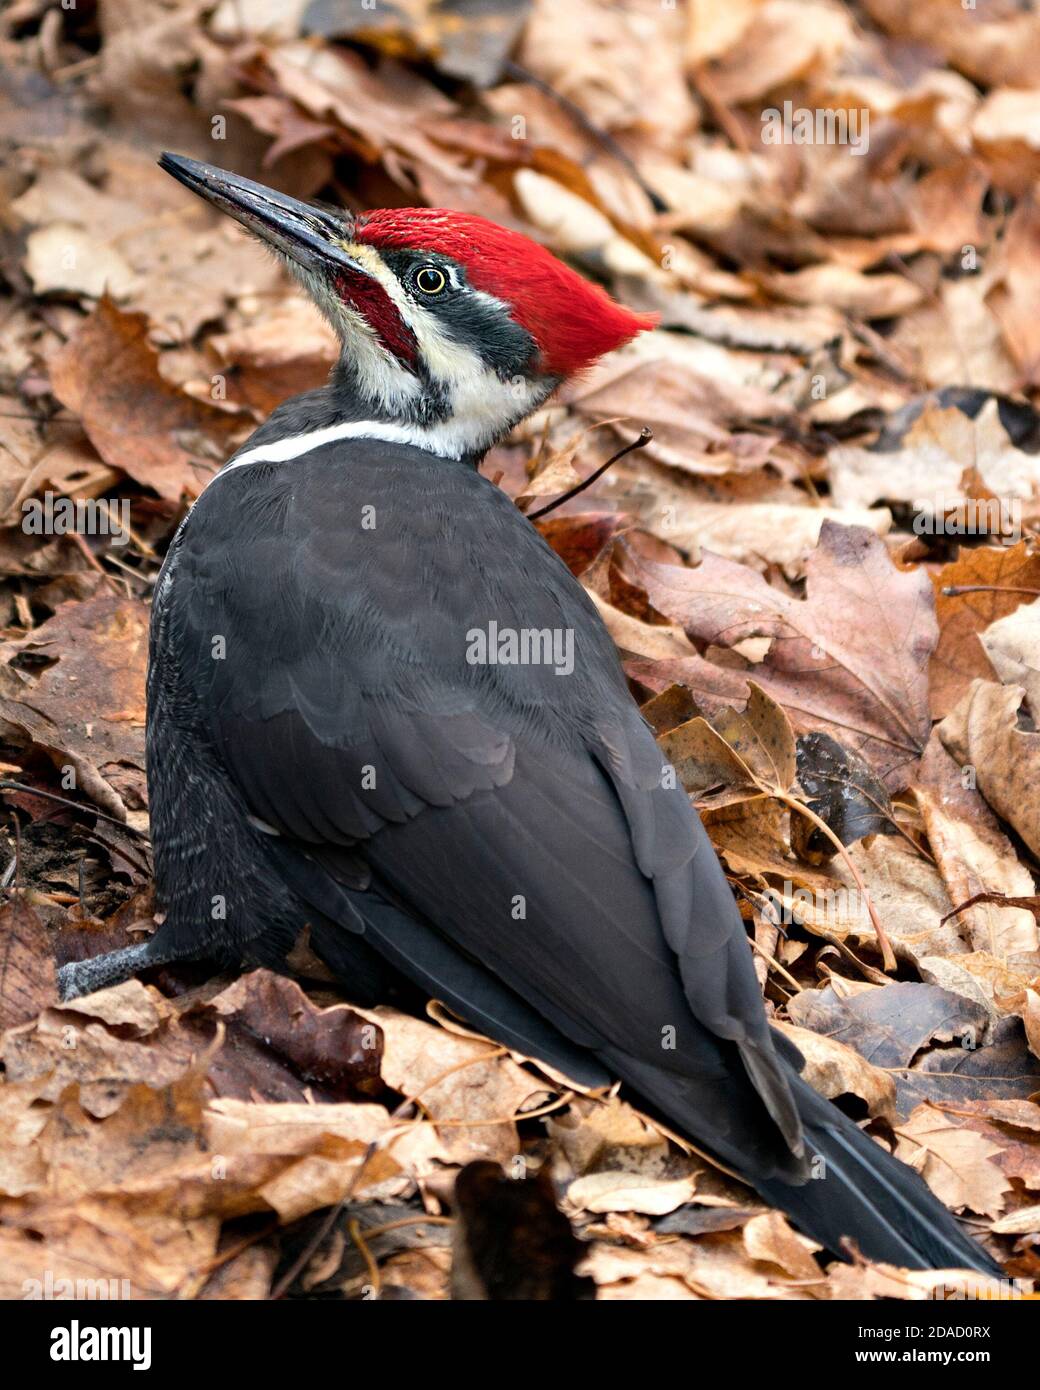 Woodpecker bird close-up profile view with a brown leaves background in its environment and habitat. Stock Photo